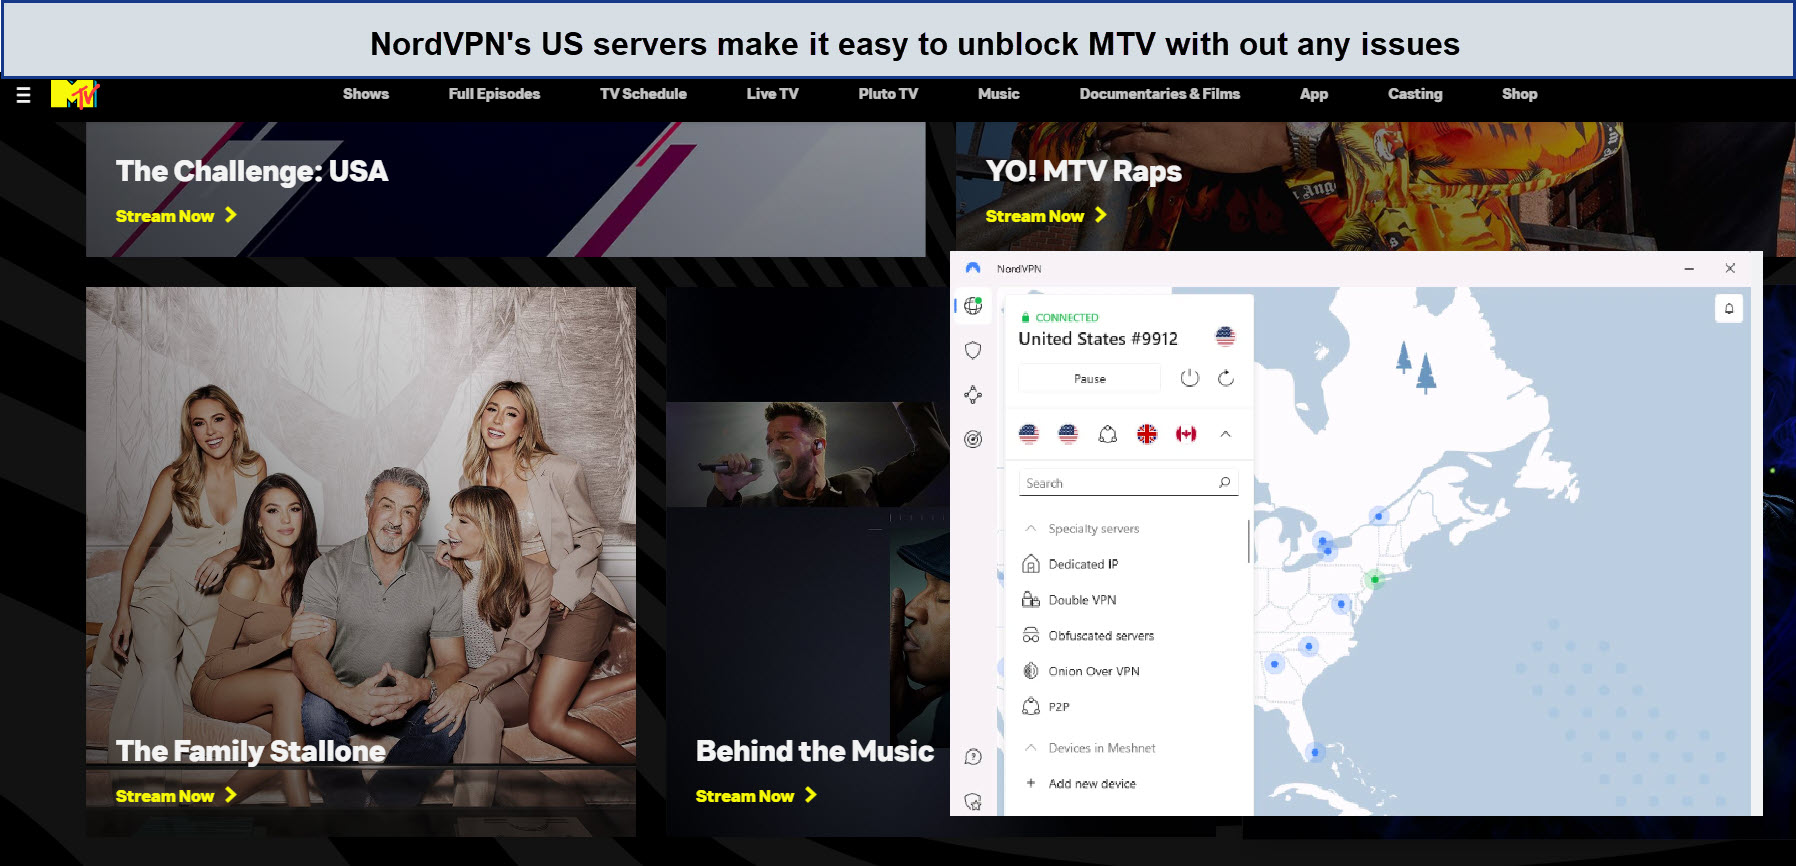 unblock-MTV-with NordVPN-outside-USA